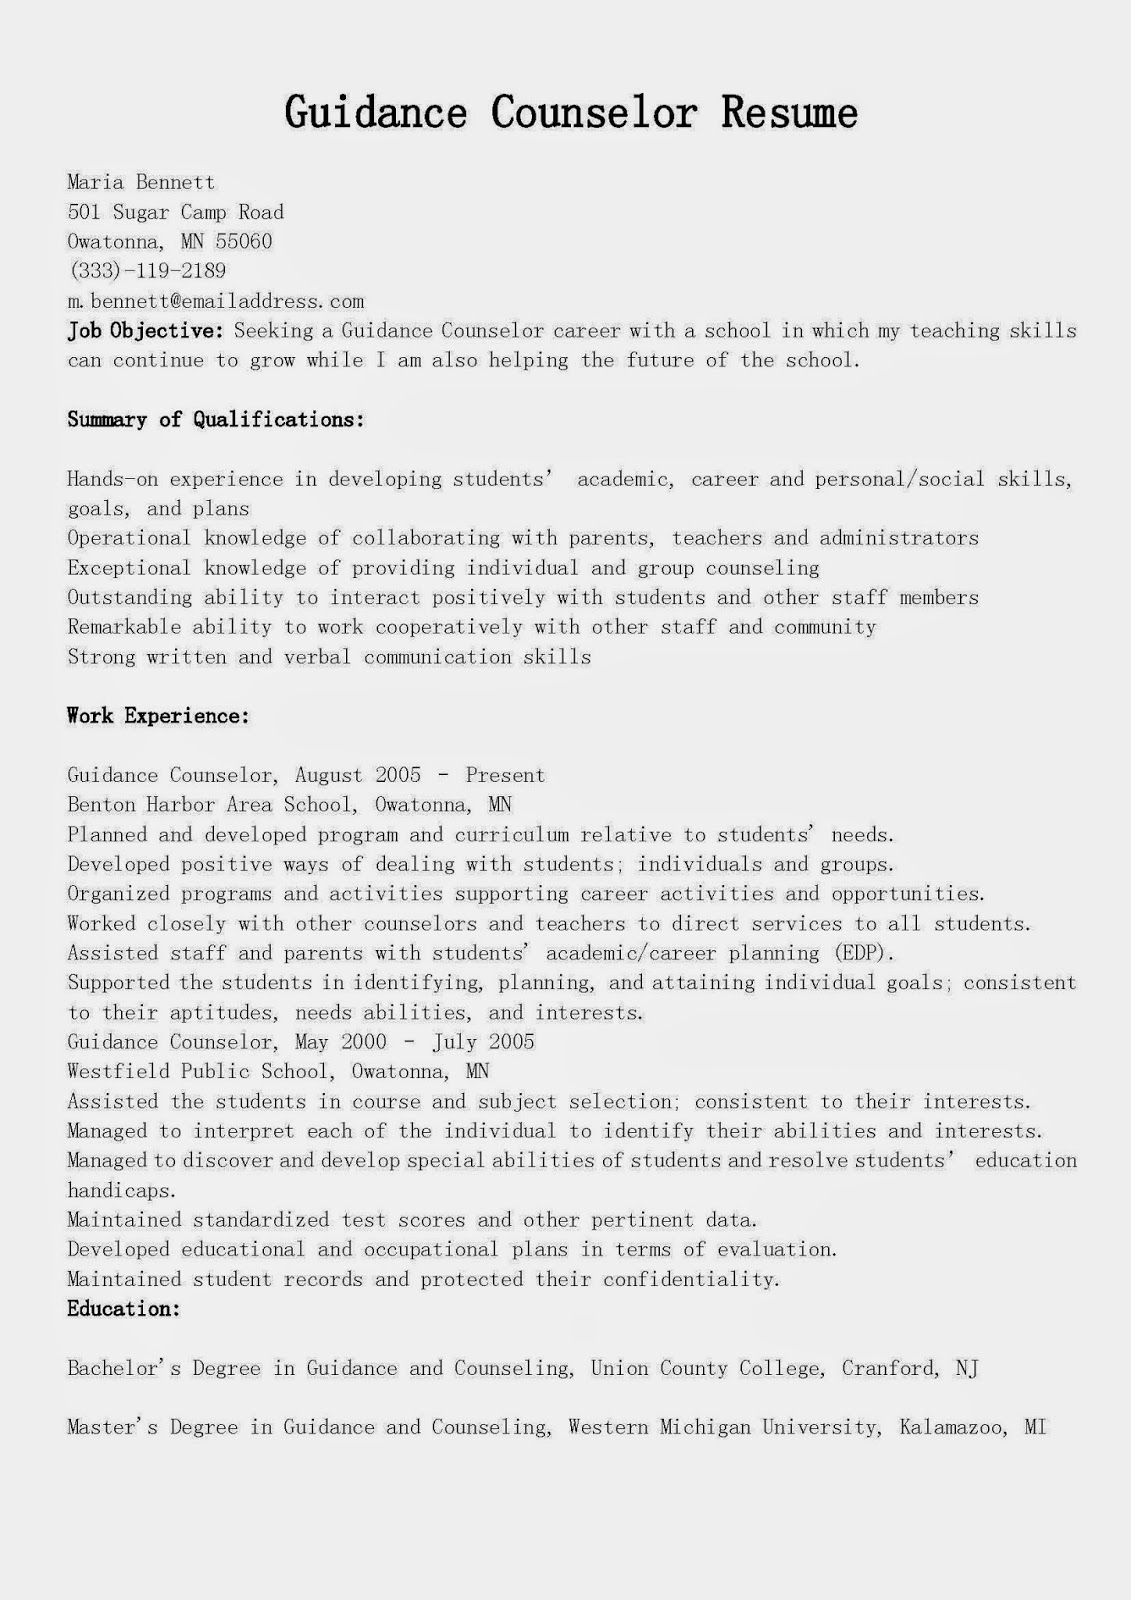 Resume format career counselor